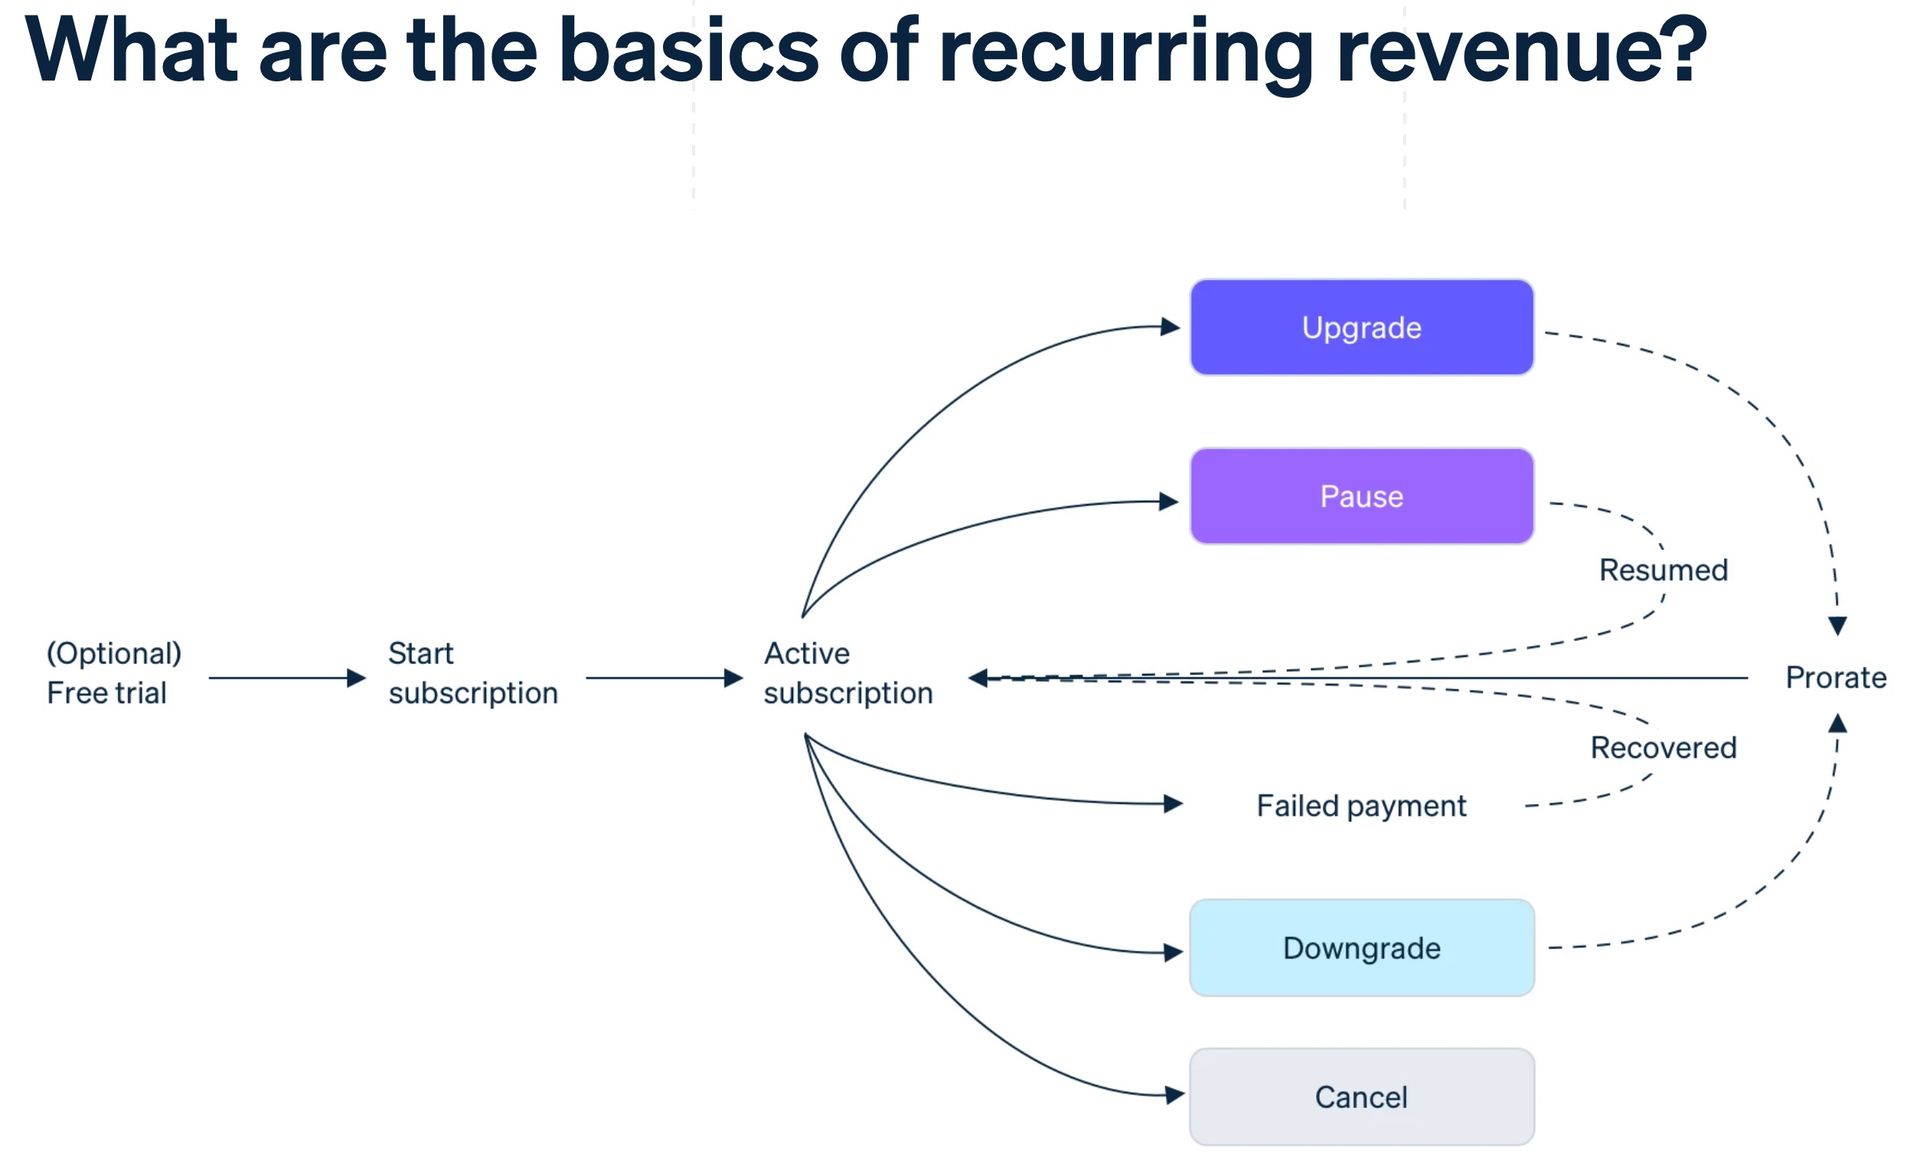 a diagram showing the basics of recurring revenue